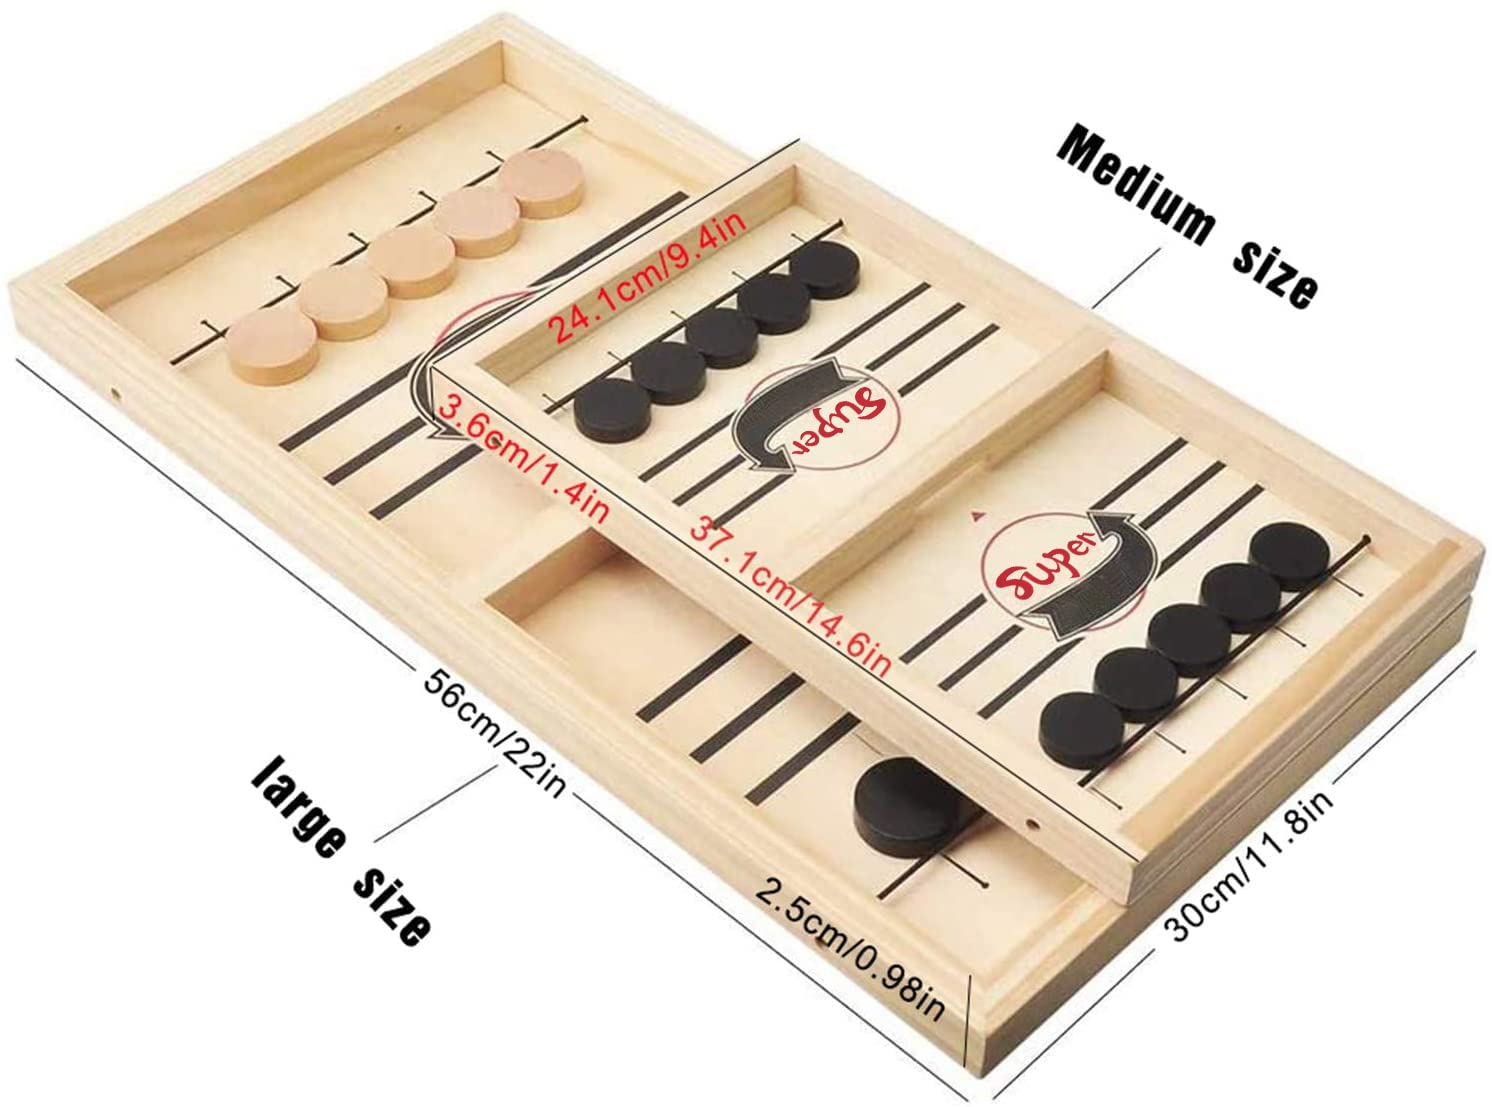 Sling Puck Game and Chess Game,Fast Sling Puck Game,Wooden Board Game for  Kids and Family,Sling Puck Winner Board Games for Family, Birthday Gift 